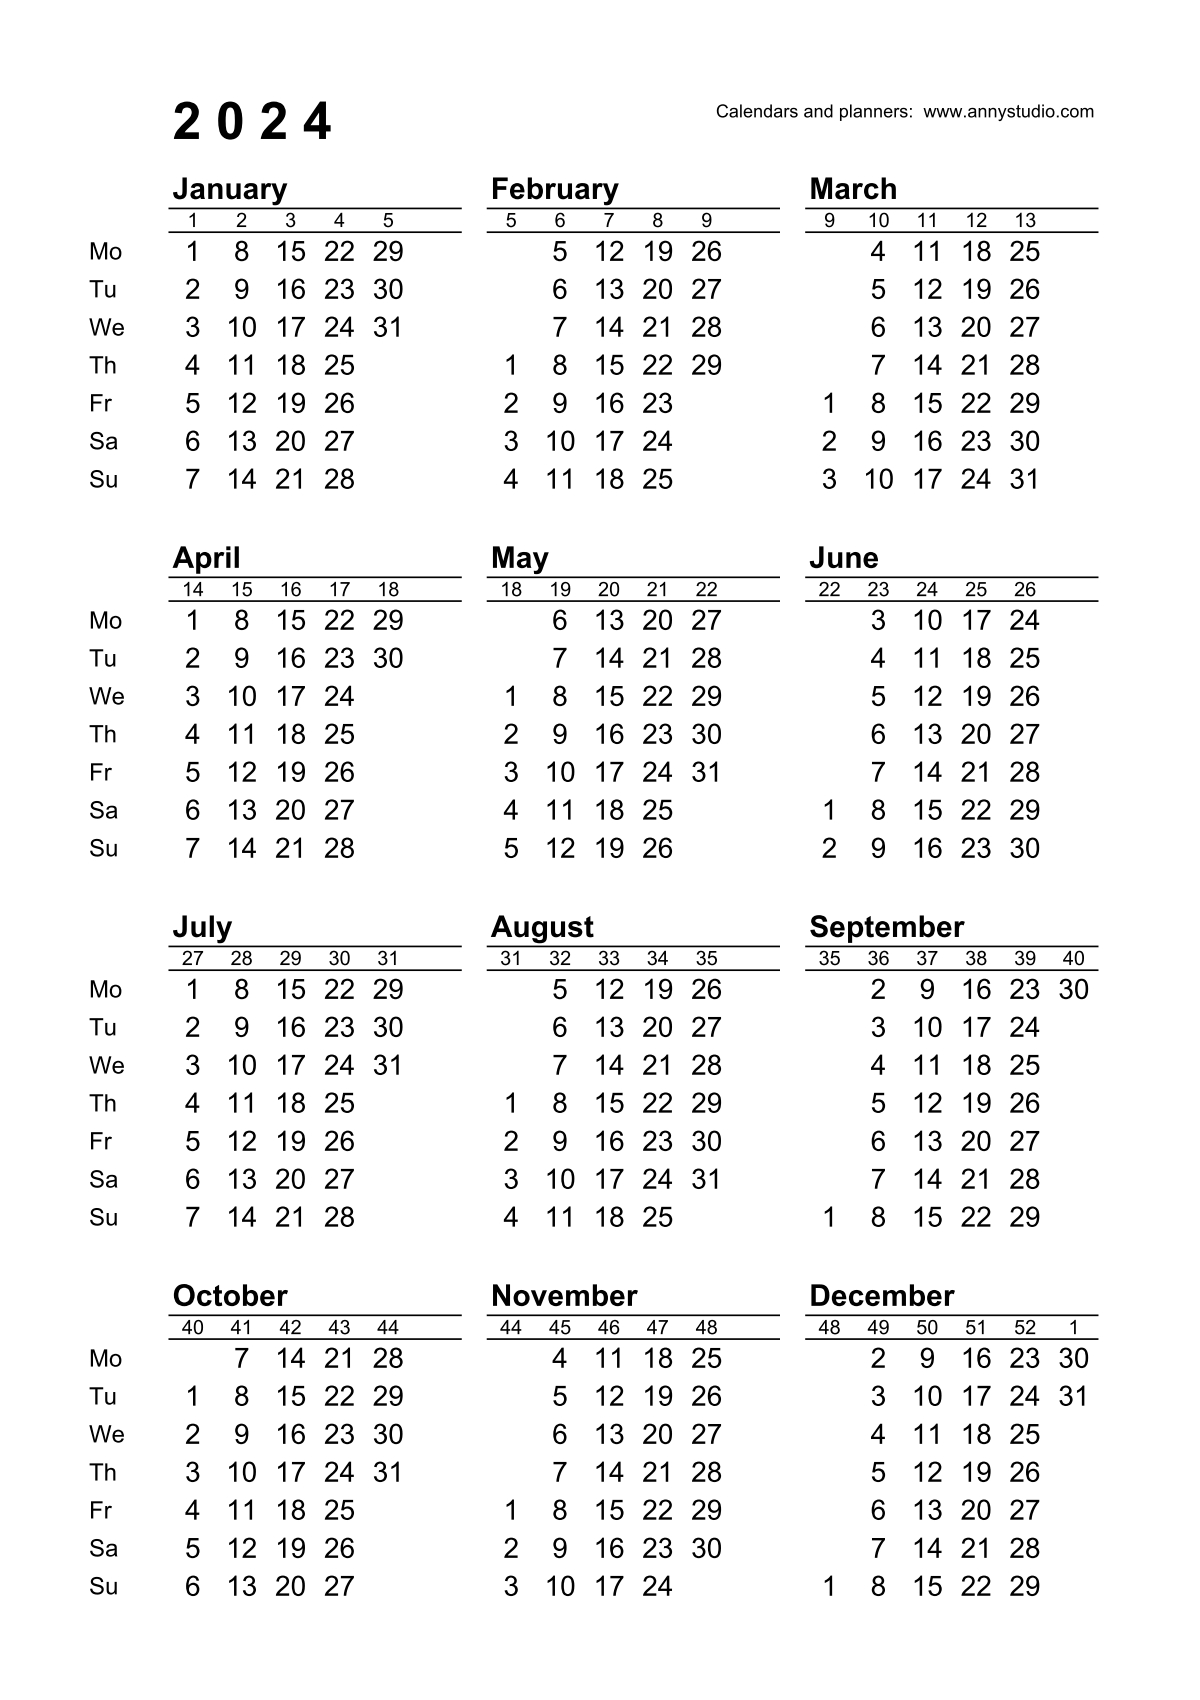 Free Printable Calendars And Planners 2024, 2025 And 2026 | Printable Calendar 2024 Qld School